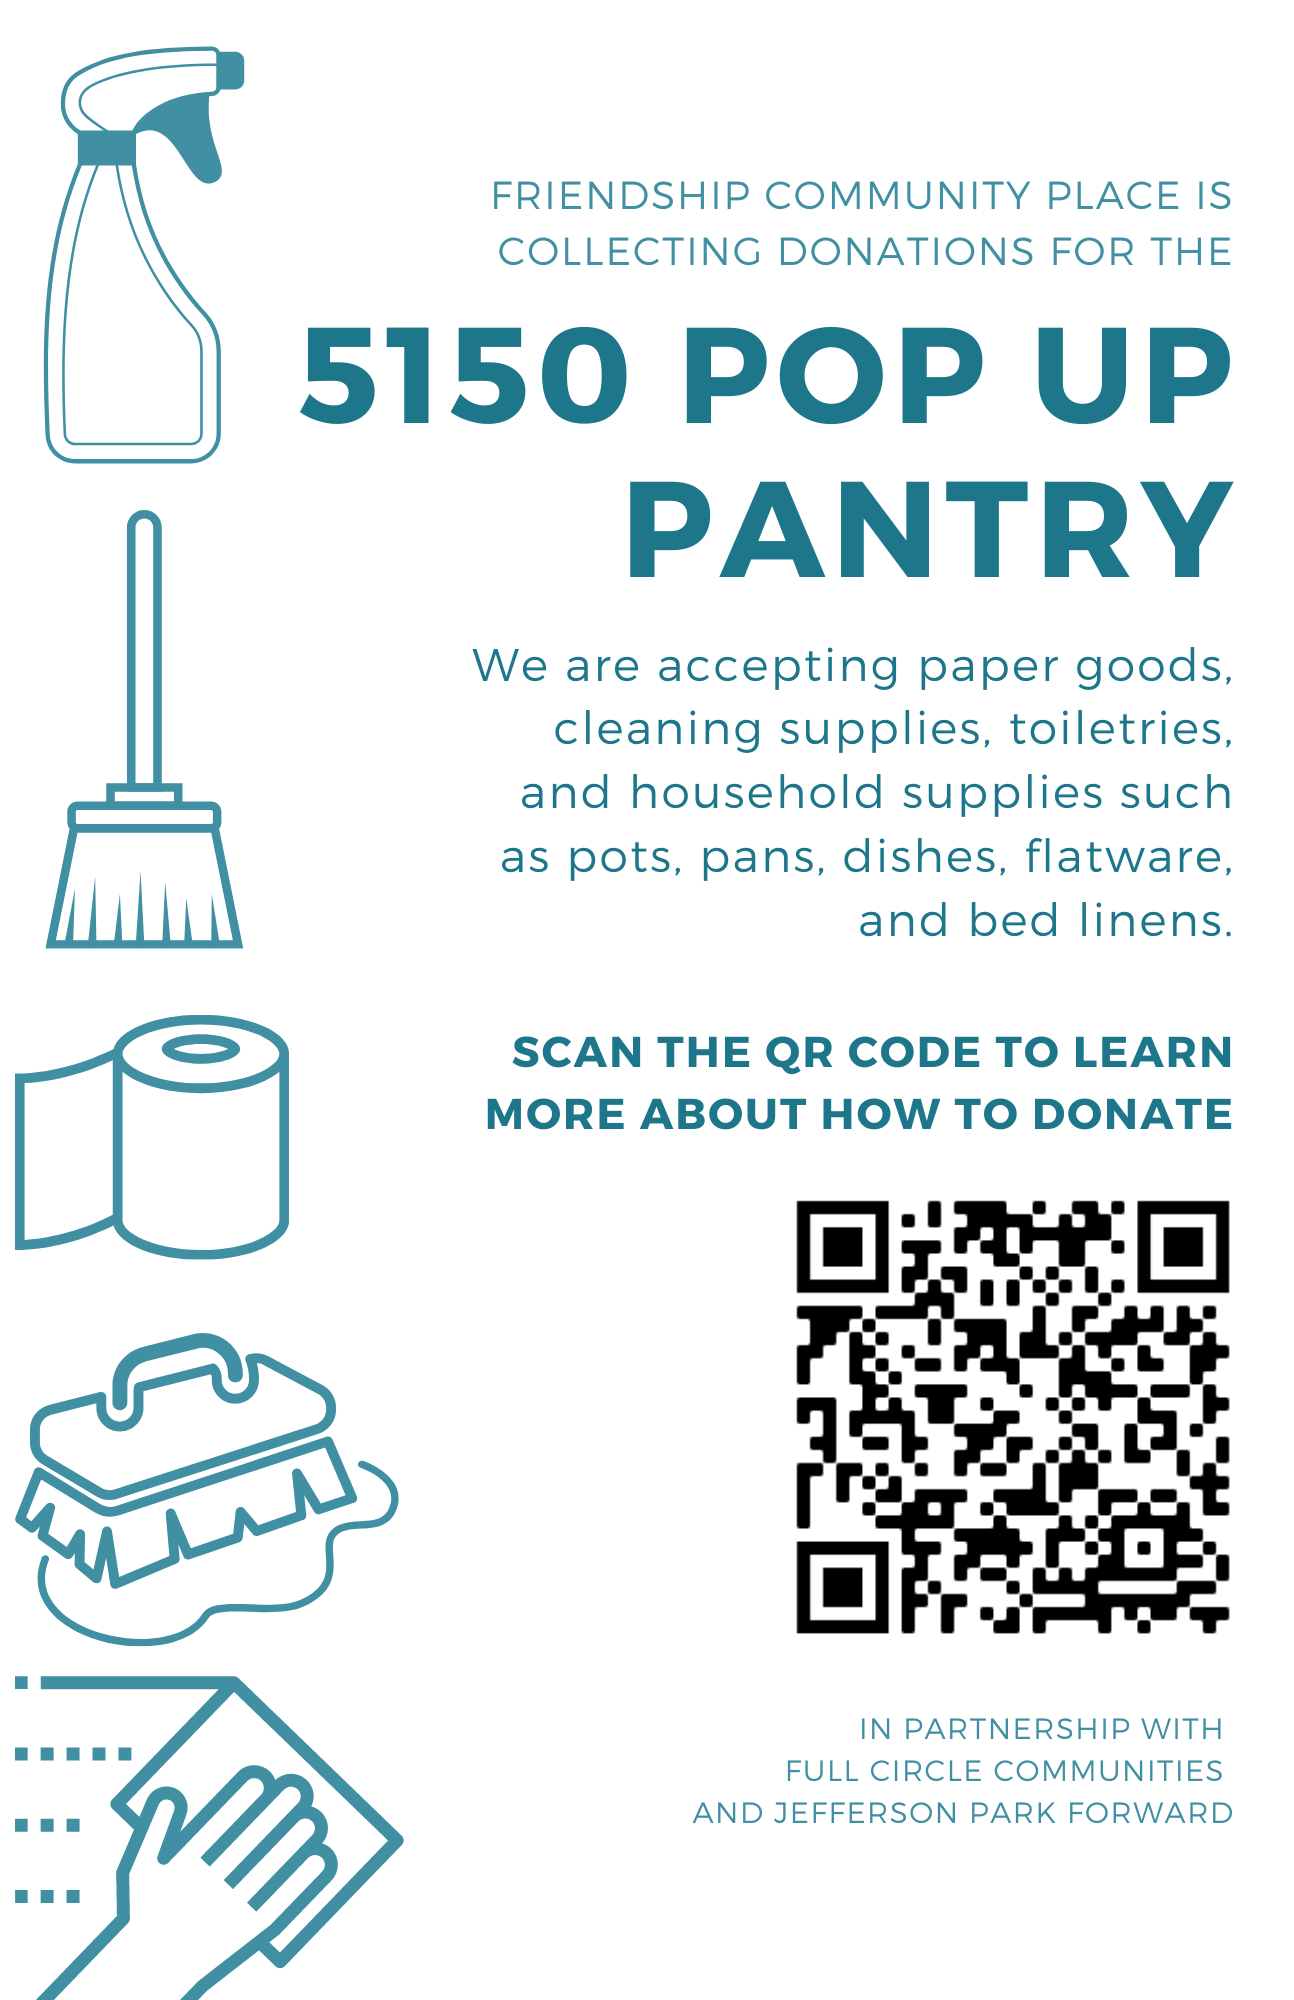 Pop Up Pantry Flyers